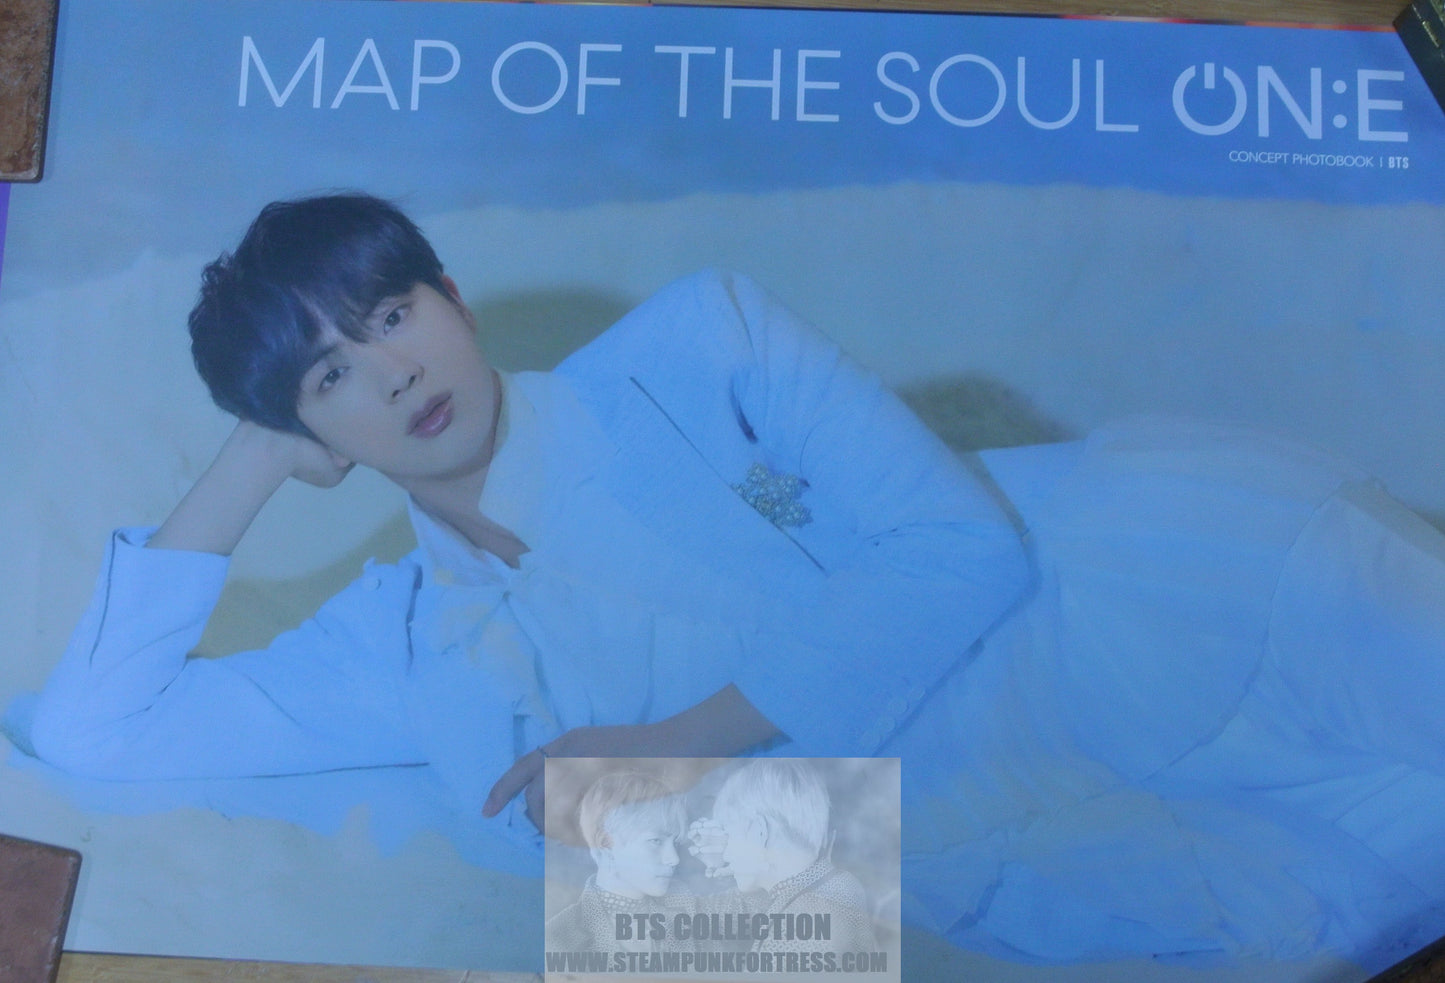 BTS JIN KIM SEOKJIN SEOK-JIN POSTER PHOTO FROM MAP OF THE SOUL ON:E ONE BOOK SPECIAL 2 SET FIRST EDITION LIMITED VERSION NEW OFFICIAL MERCHANDISE 24" X 36"